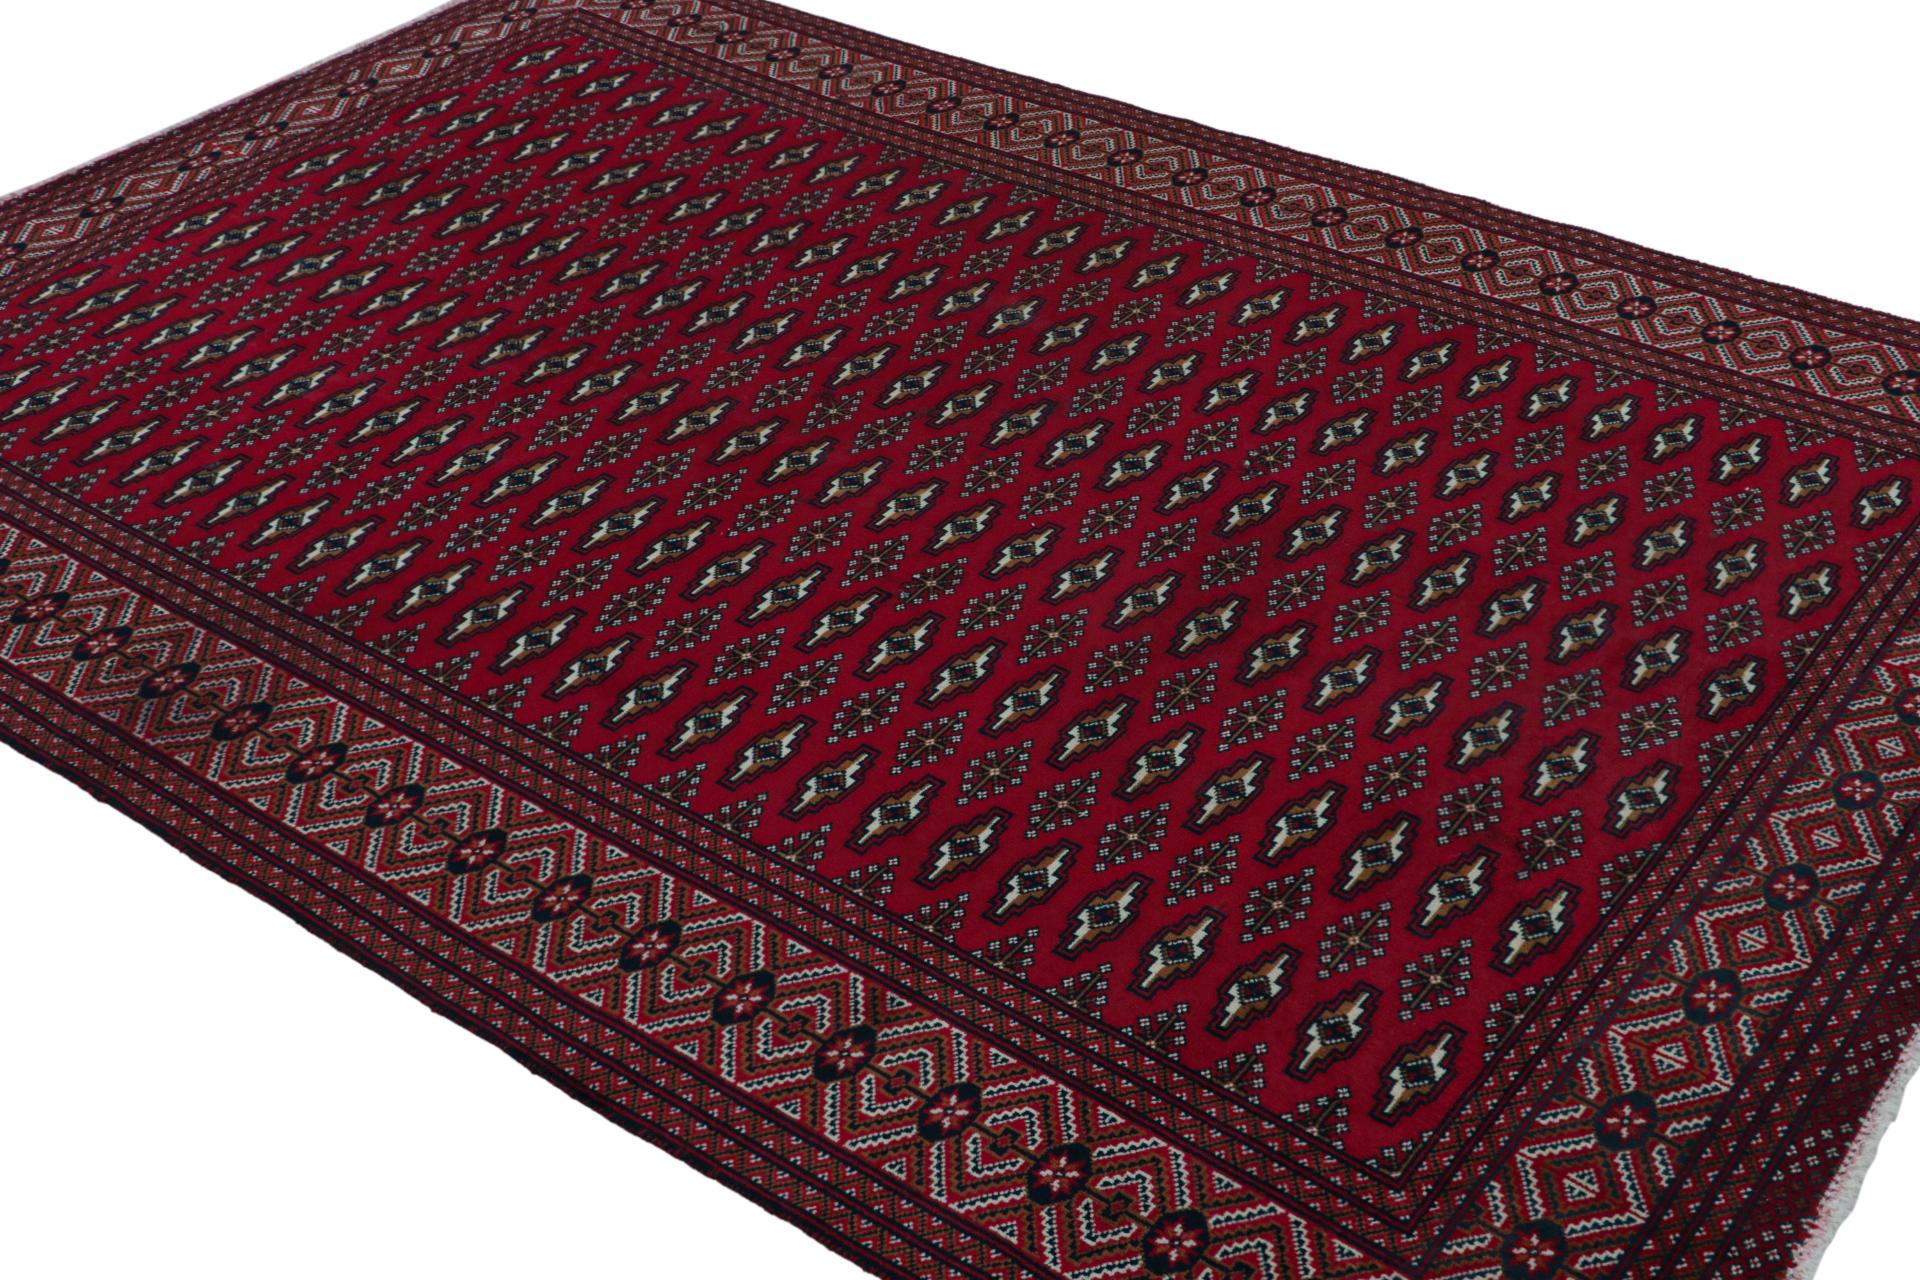 Hand knotted in wool on cotton, a 6x9 Persian rug circa 1970-1980 - latest to join Rug & Kilim’s vintage selections.

On the Design:

The backdrop of the rug boasts rich saturated red in an overdyed fashion - hosting beige-brown geometric patterns